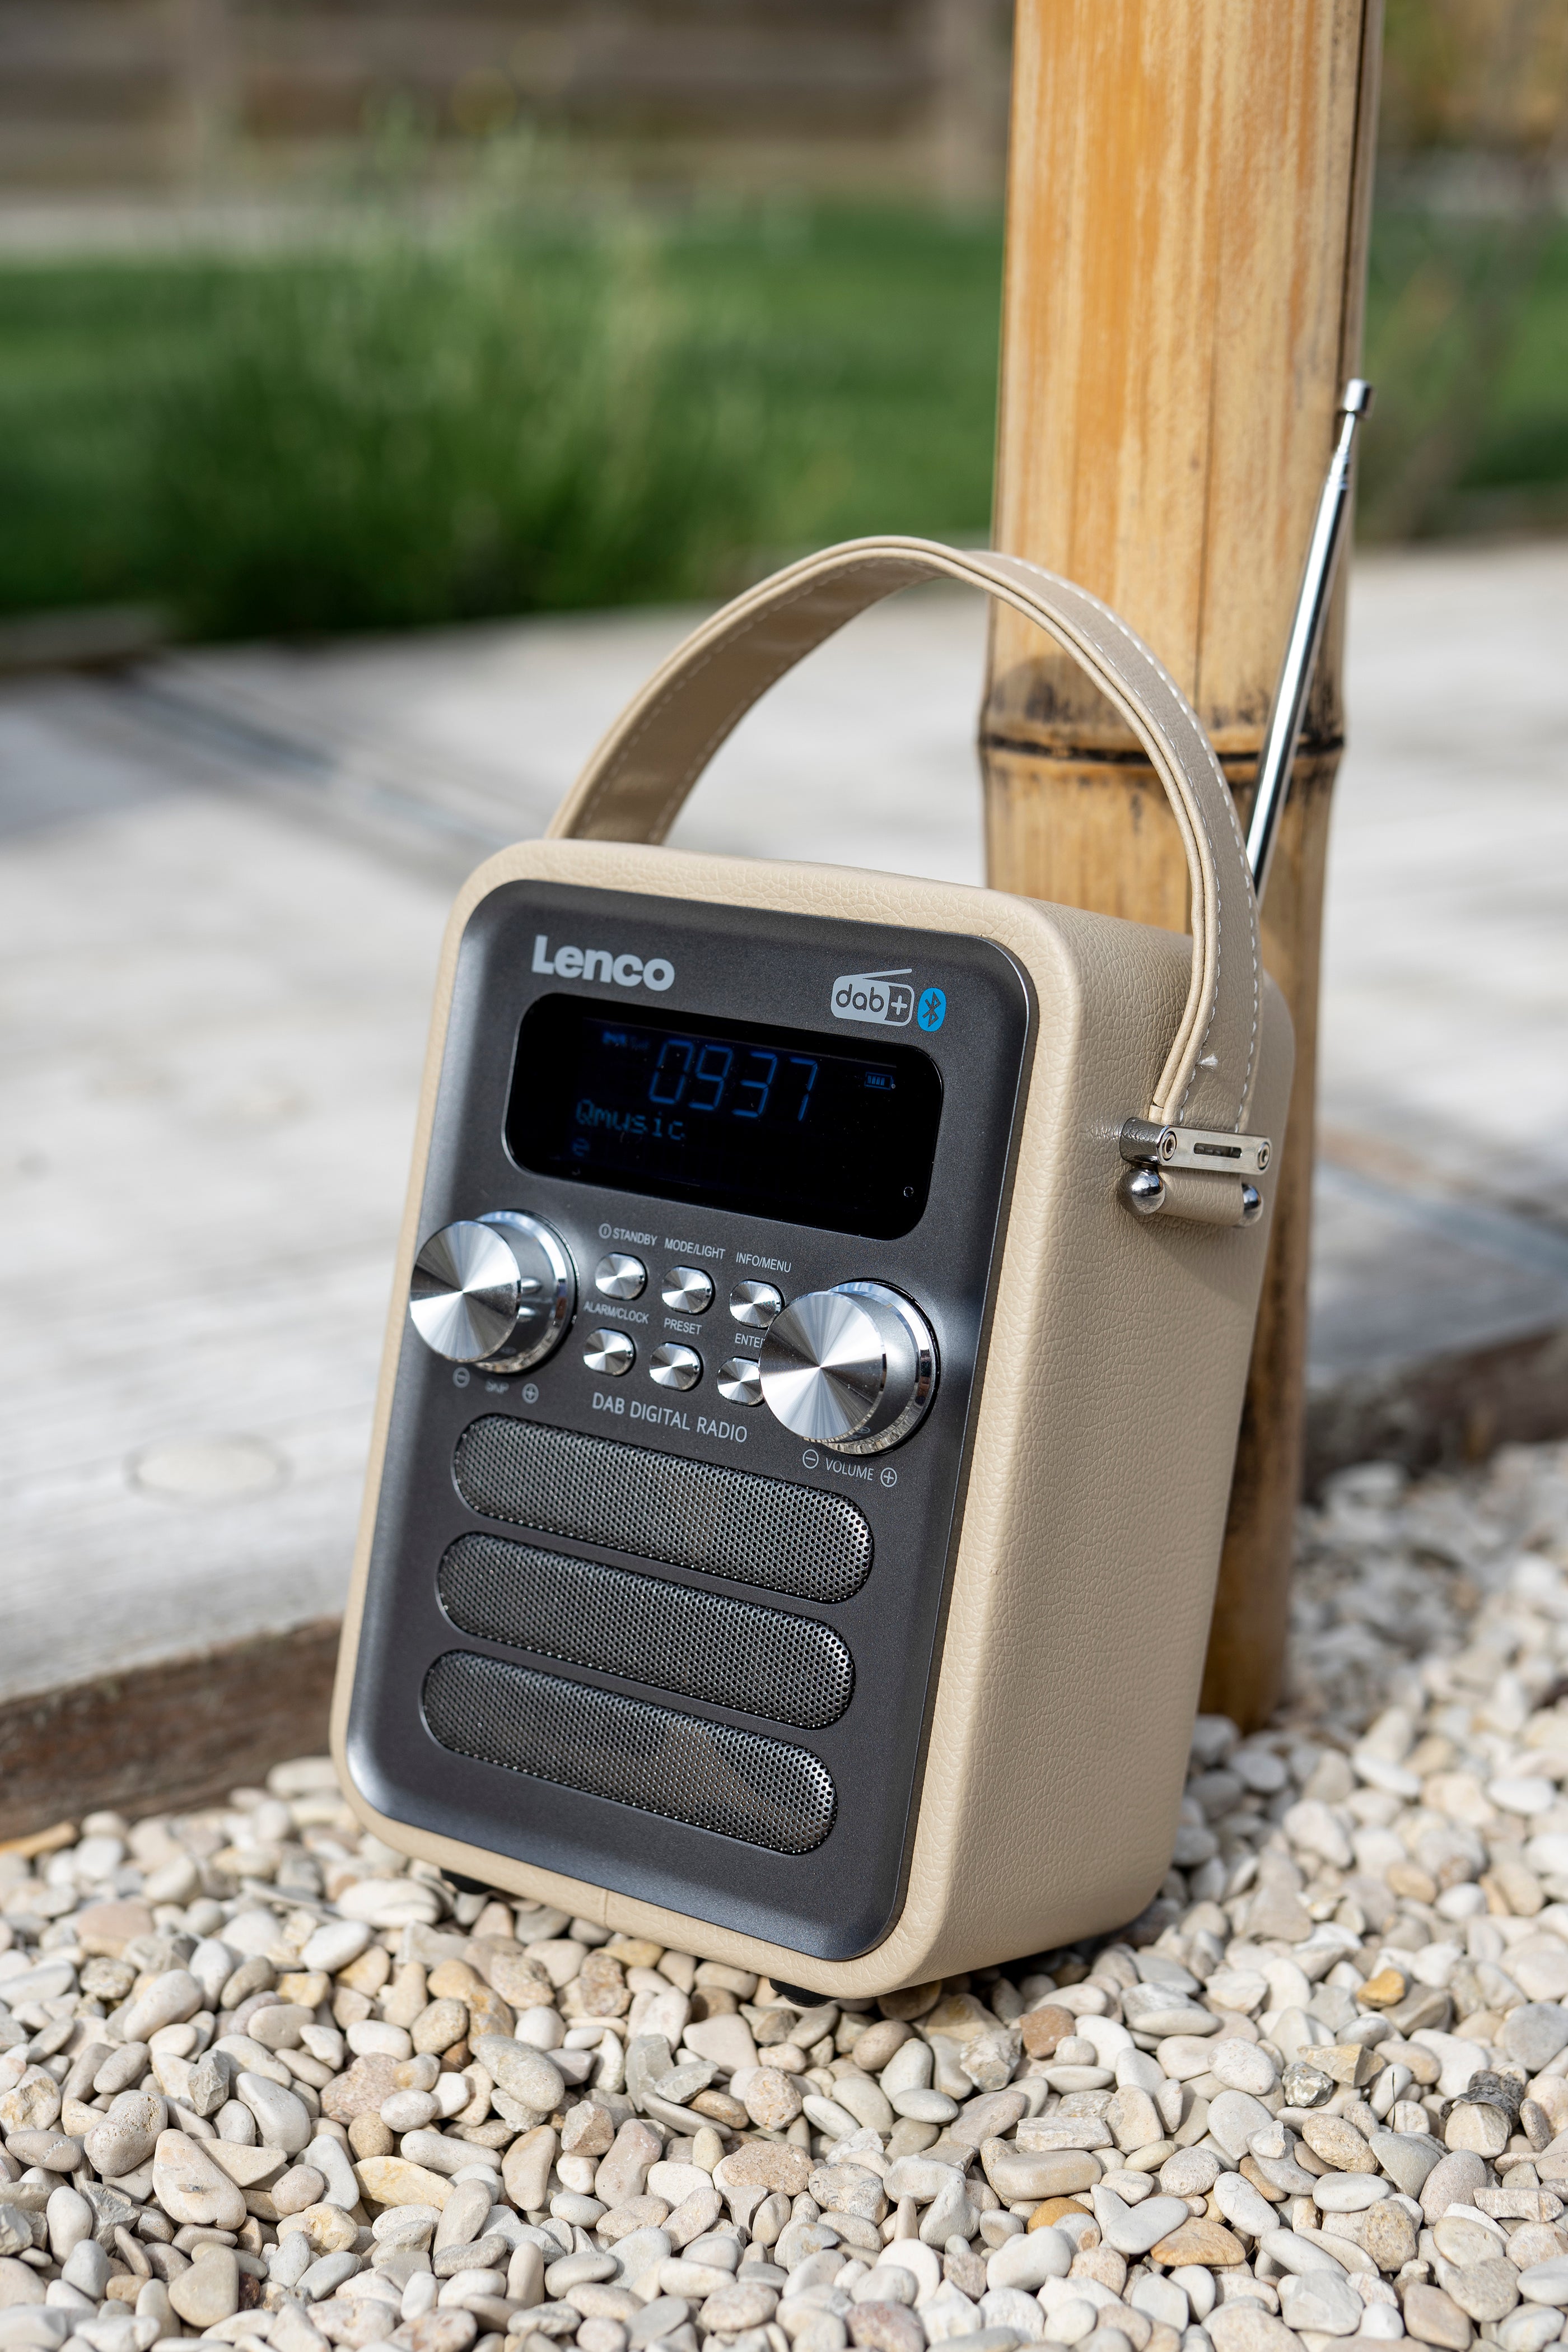 Radios from Now official the Lenco! in shop